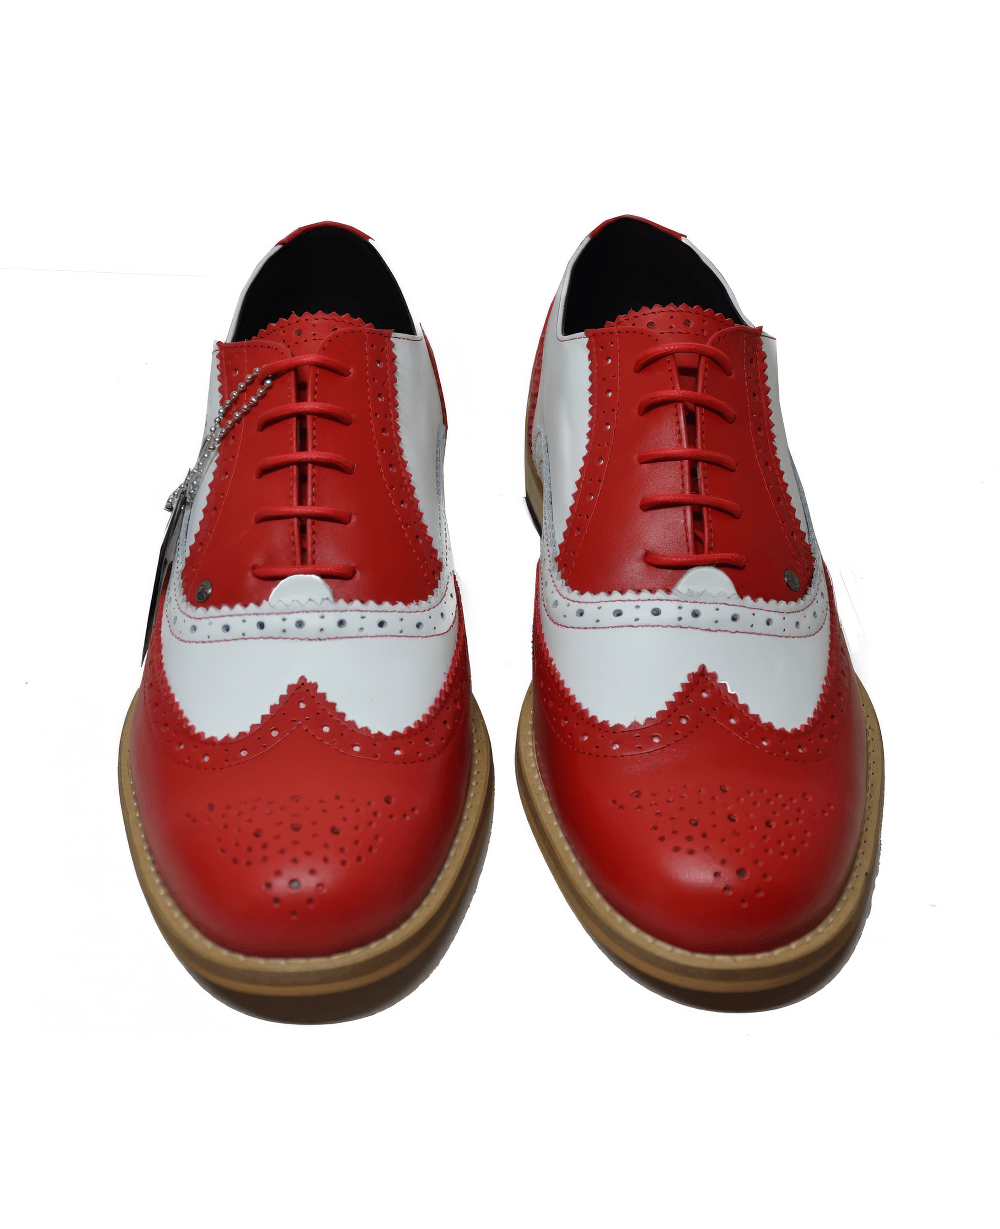 Stylish Red-White Oxford Lace-Up Footwear for Men